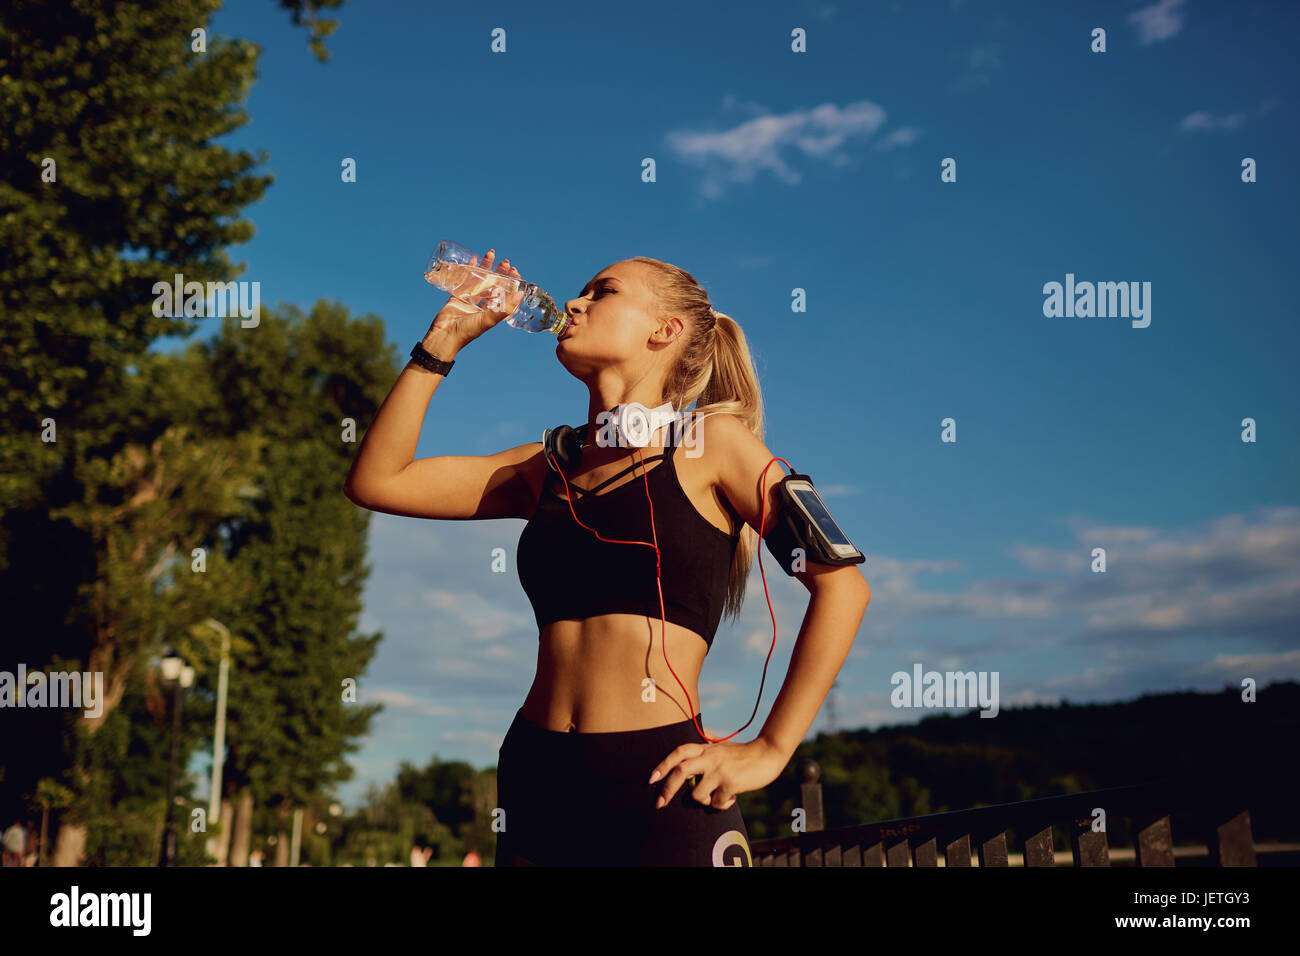 Girl runner drinks water from a bottle in the park. Stock Photo